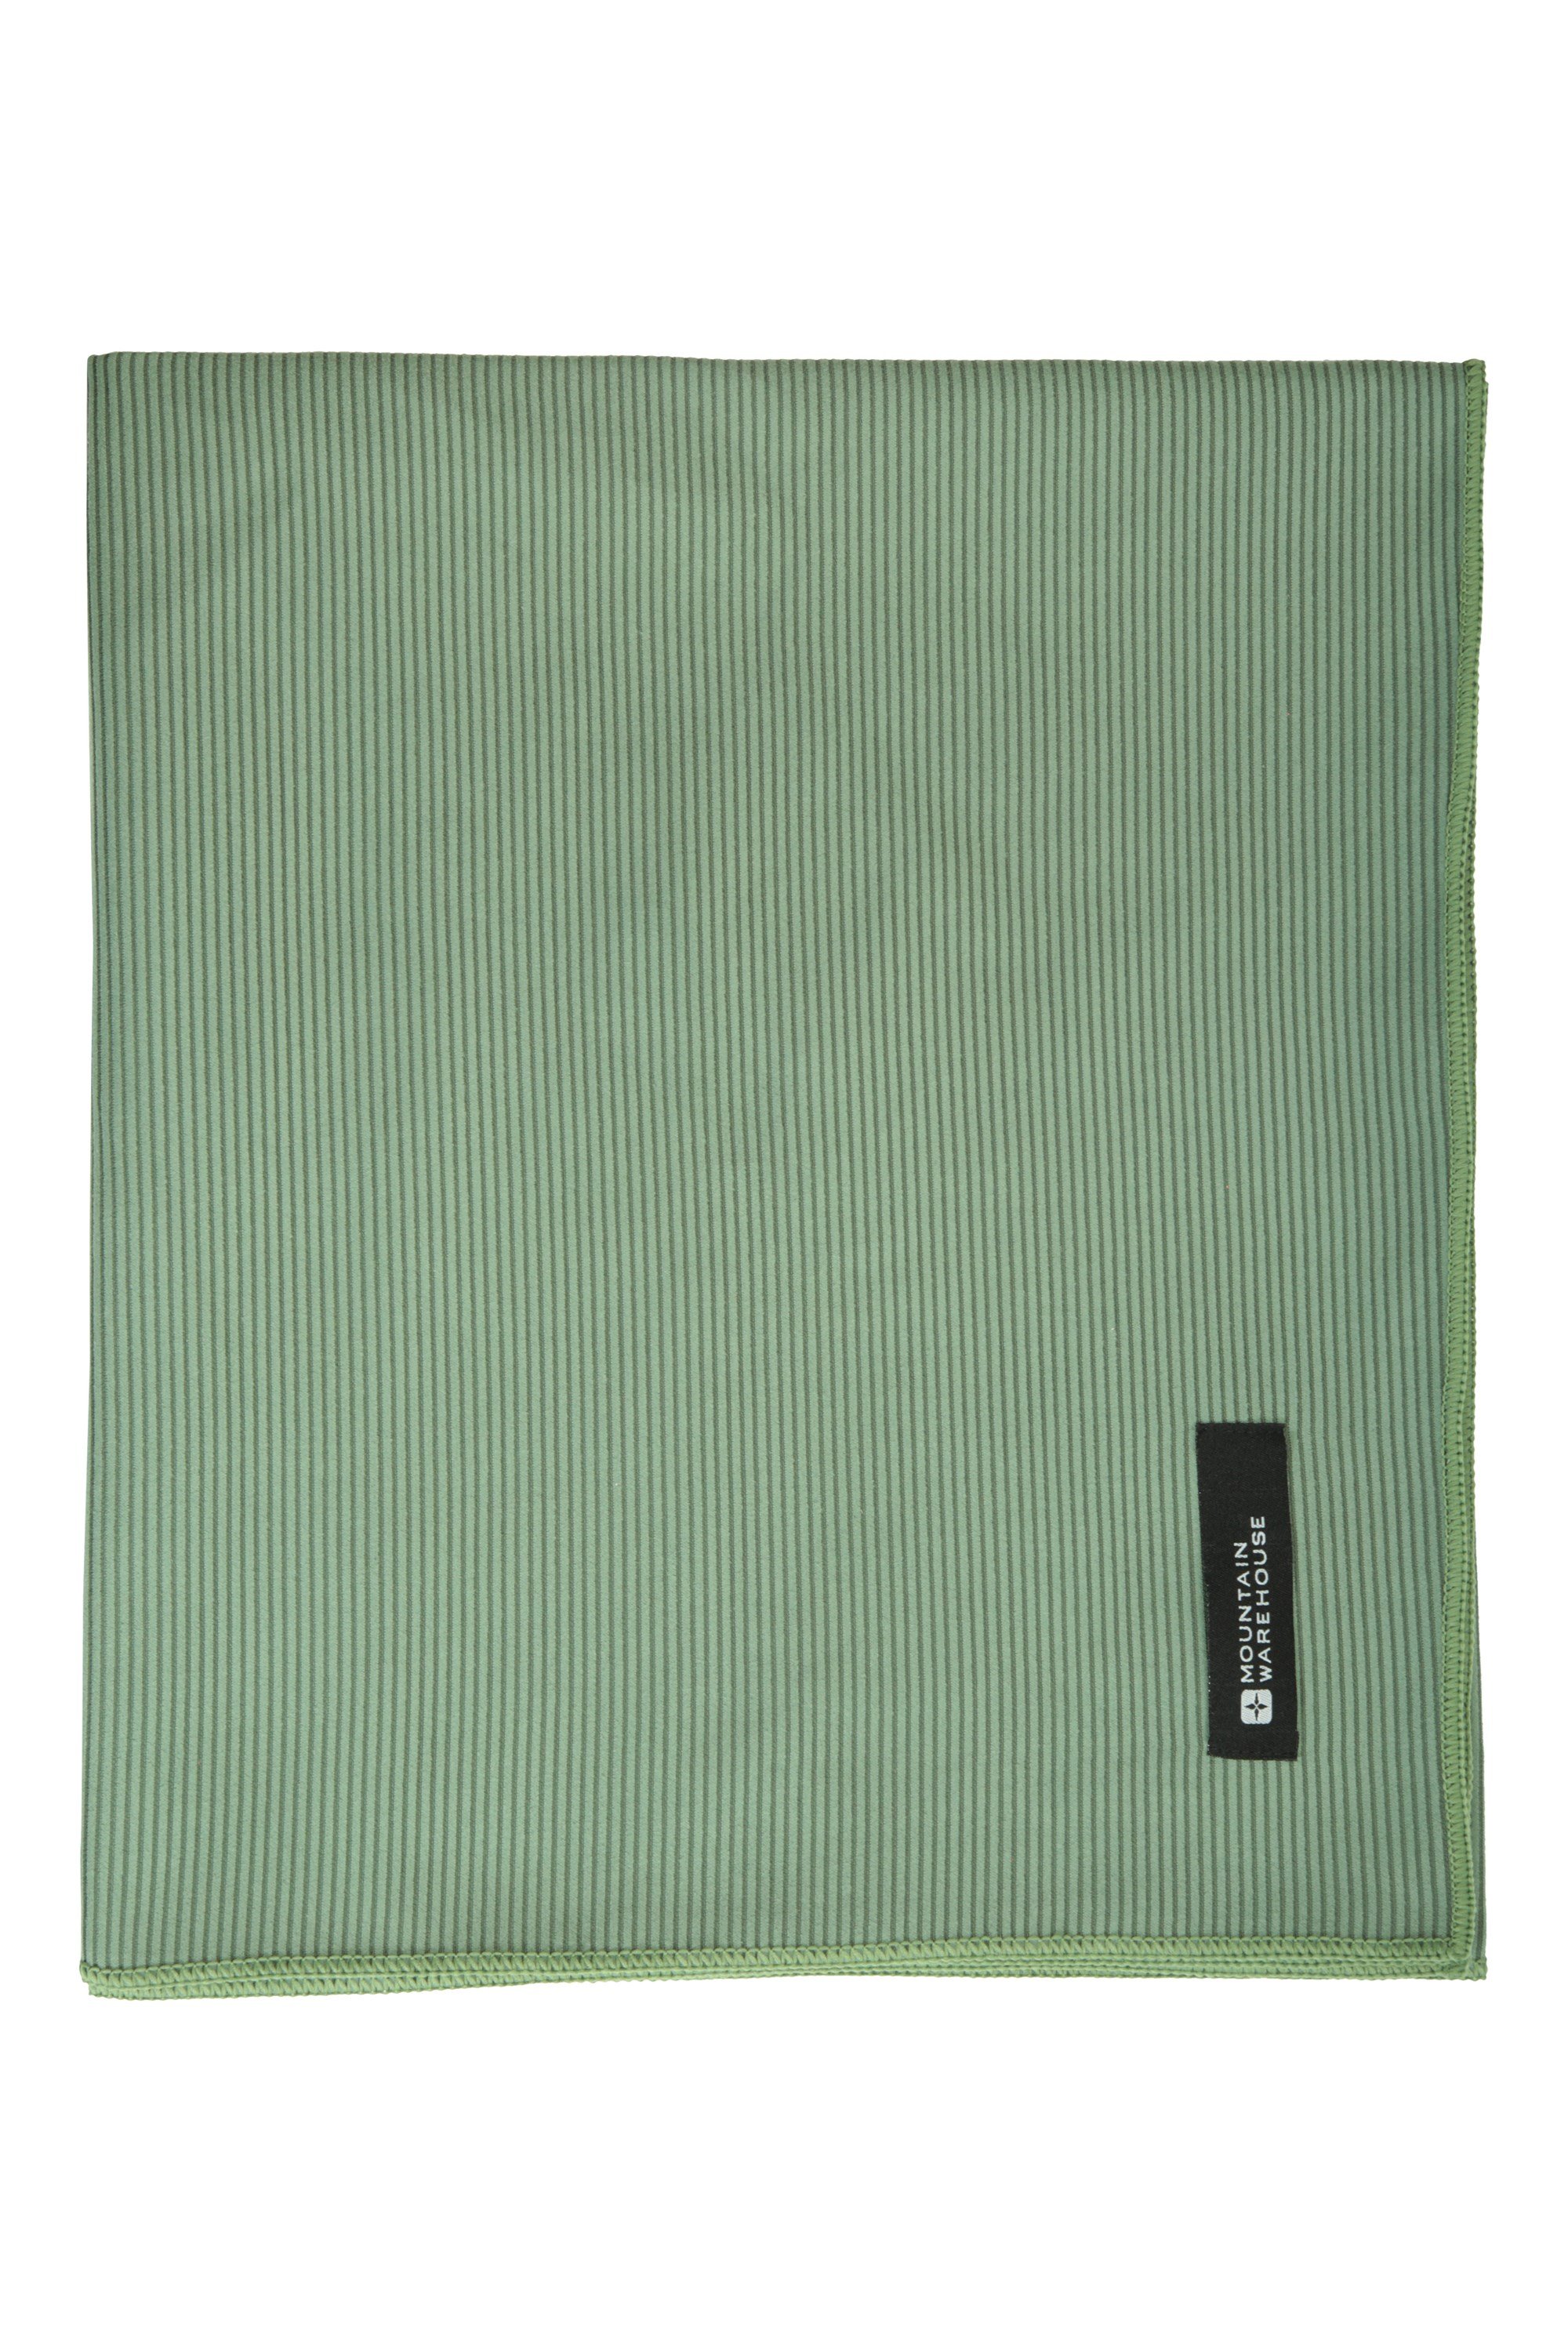 Giant Ribbed Towel - 150 x 85cm - Green